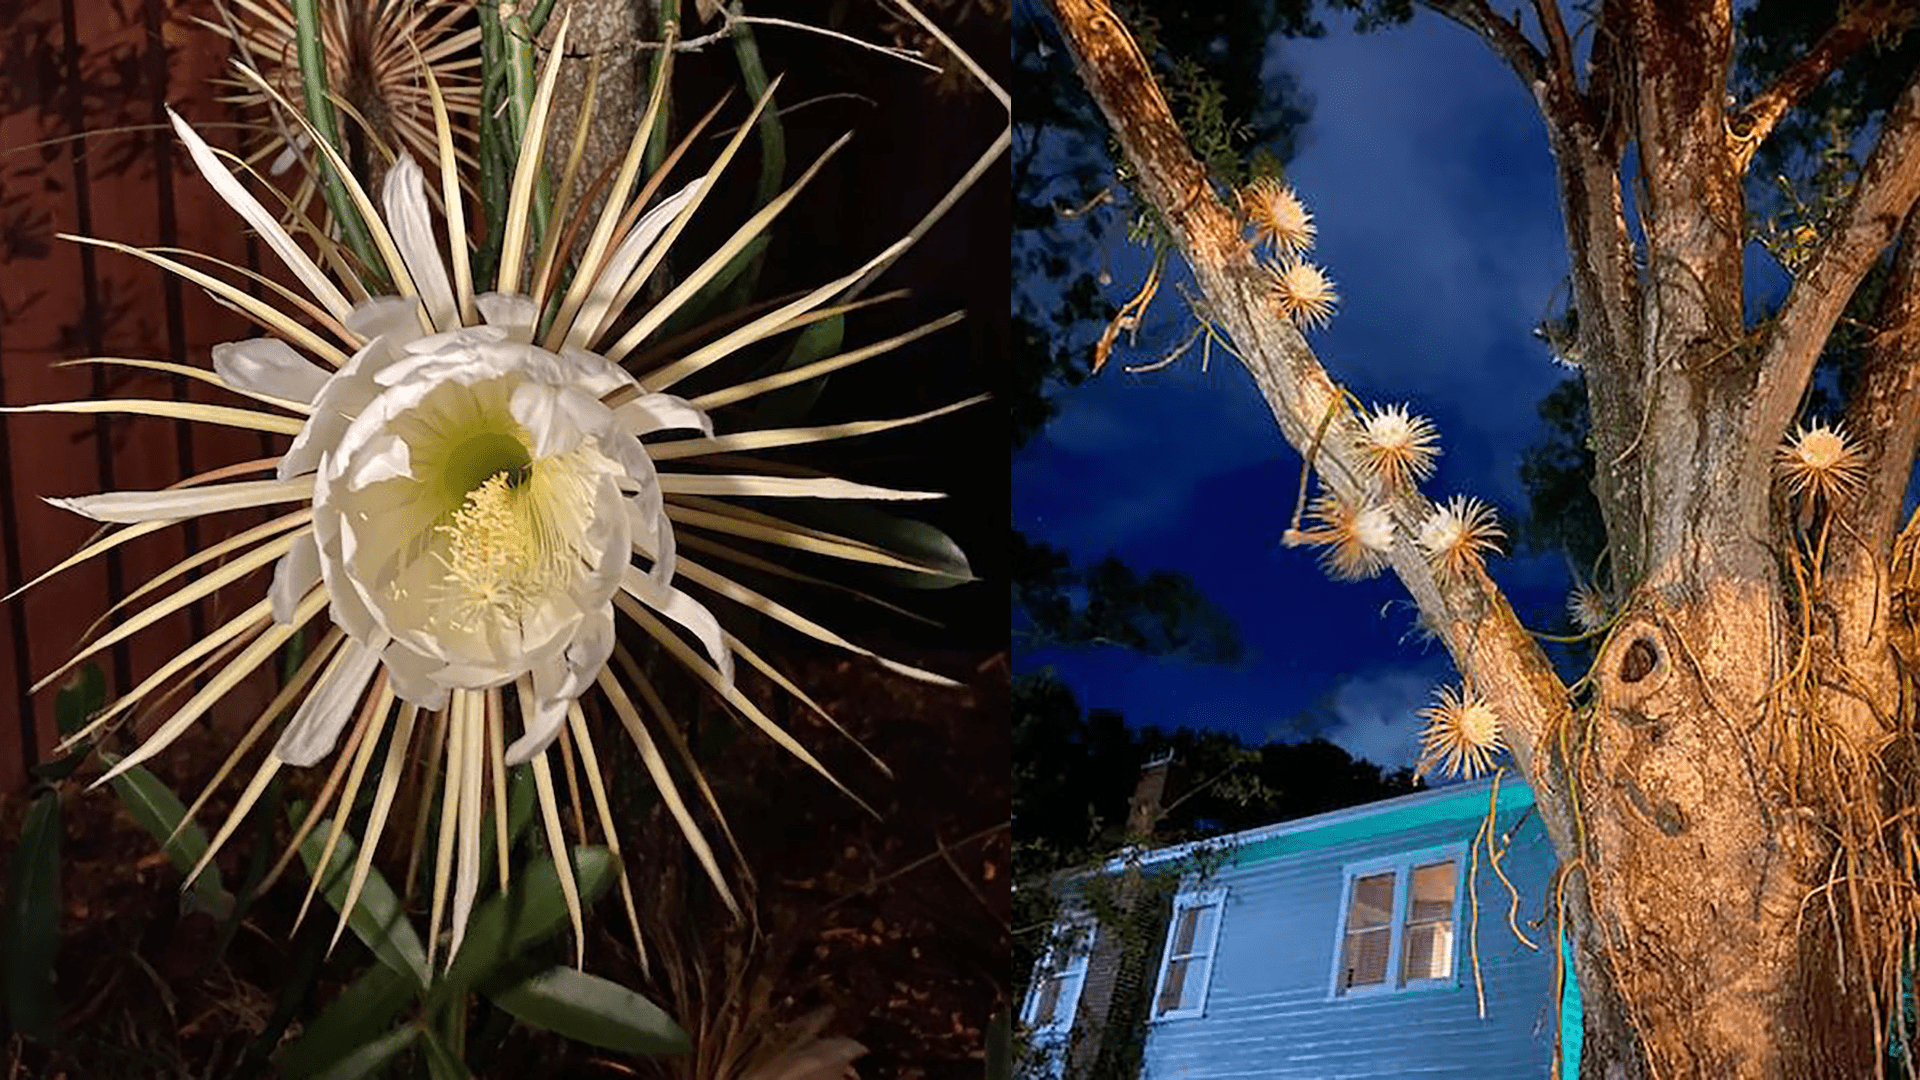 The Queen of the Night': SUNY ESF, SU gather to view rare Brazilian cactus  bloom - The Daily Orange